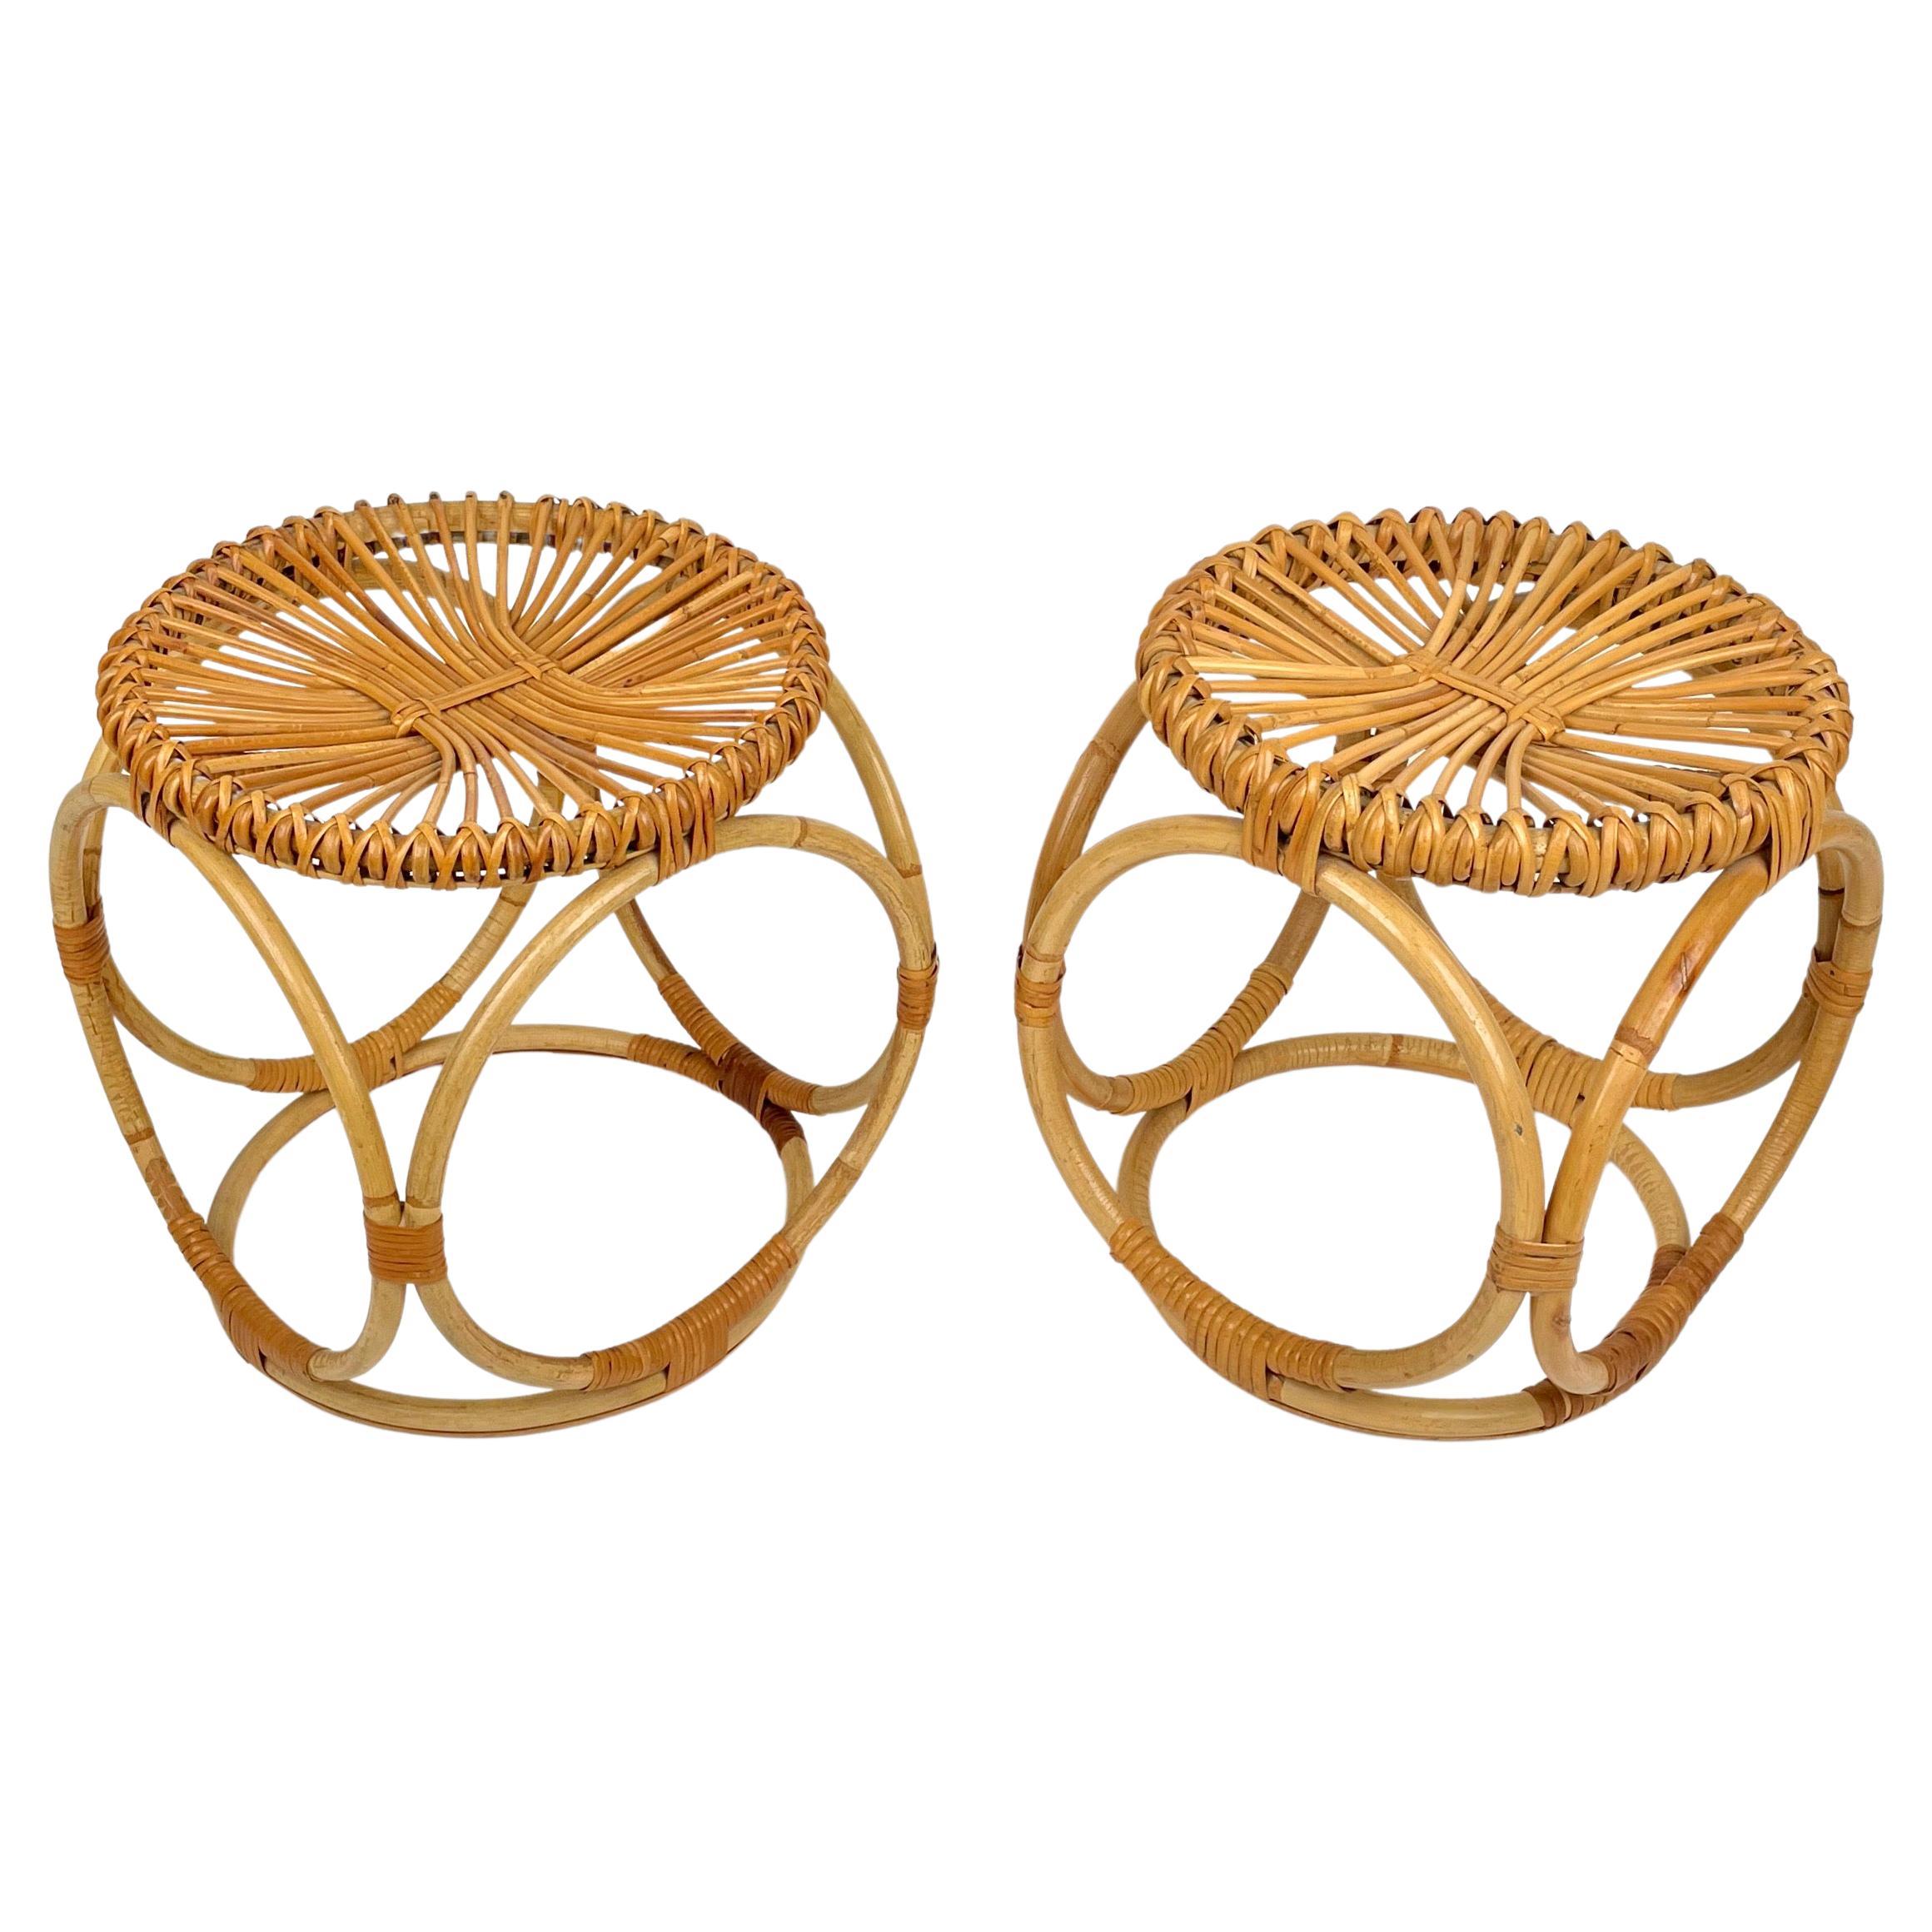 Pair of Bamboo Rattan Round Stools or Side Tables, Italy 1970s